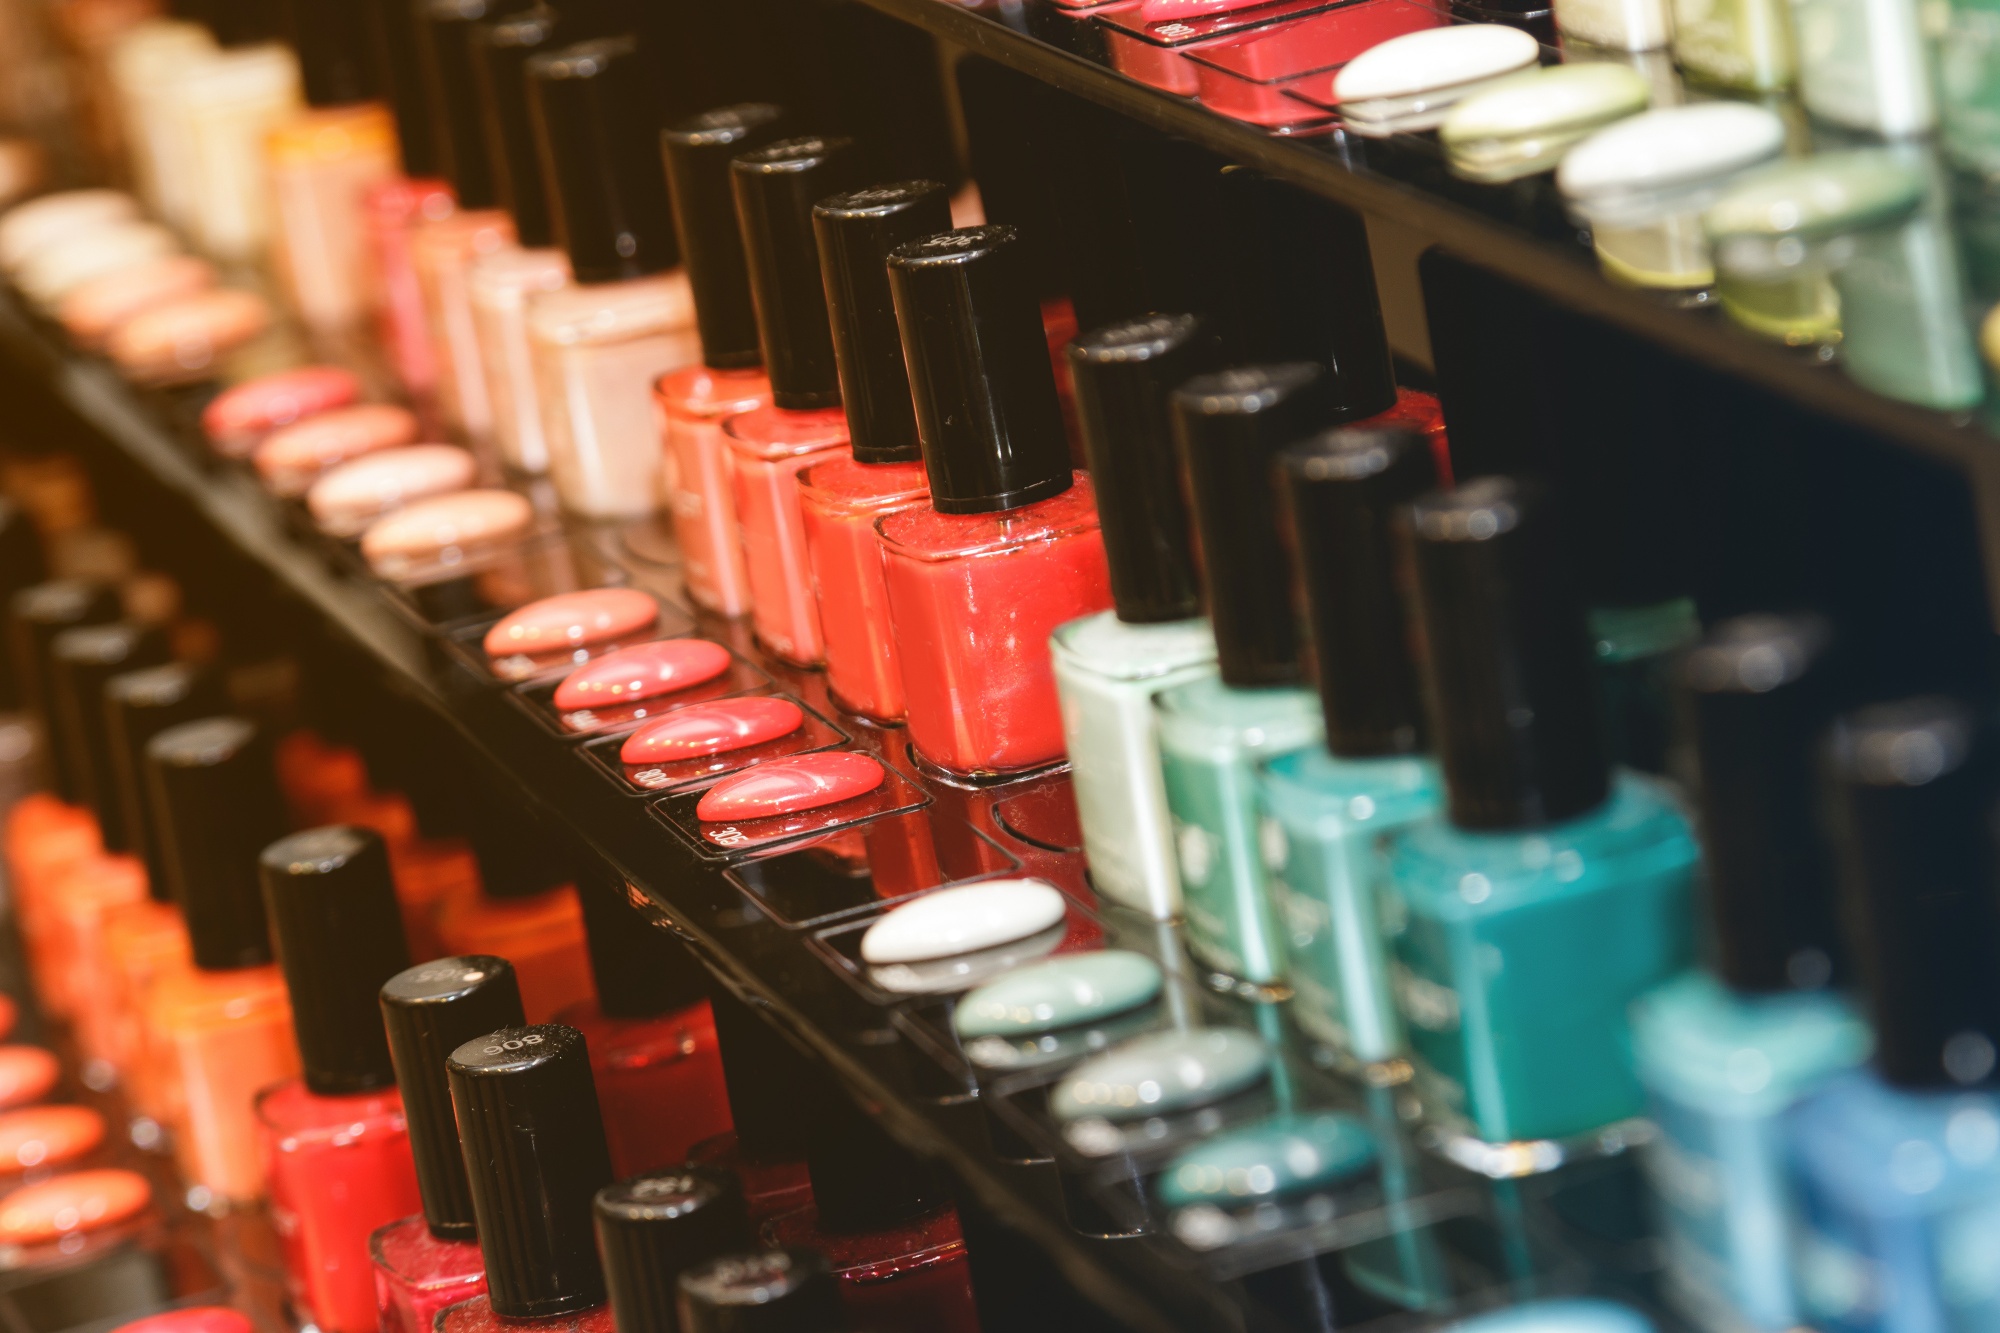 best affordable beauty finds nail polishes in a large store display